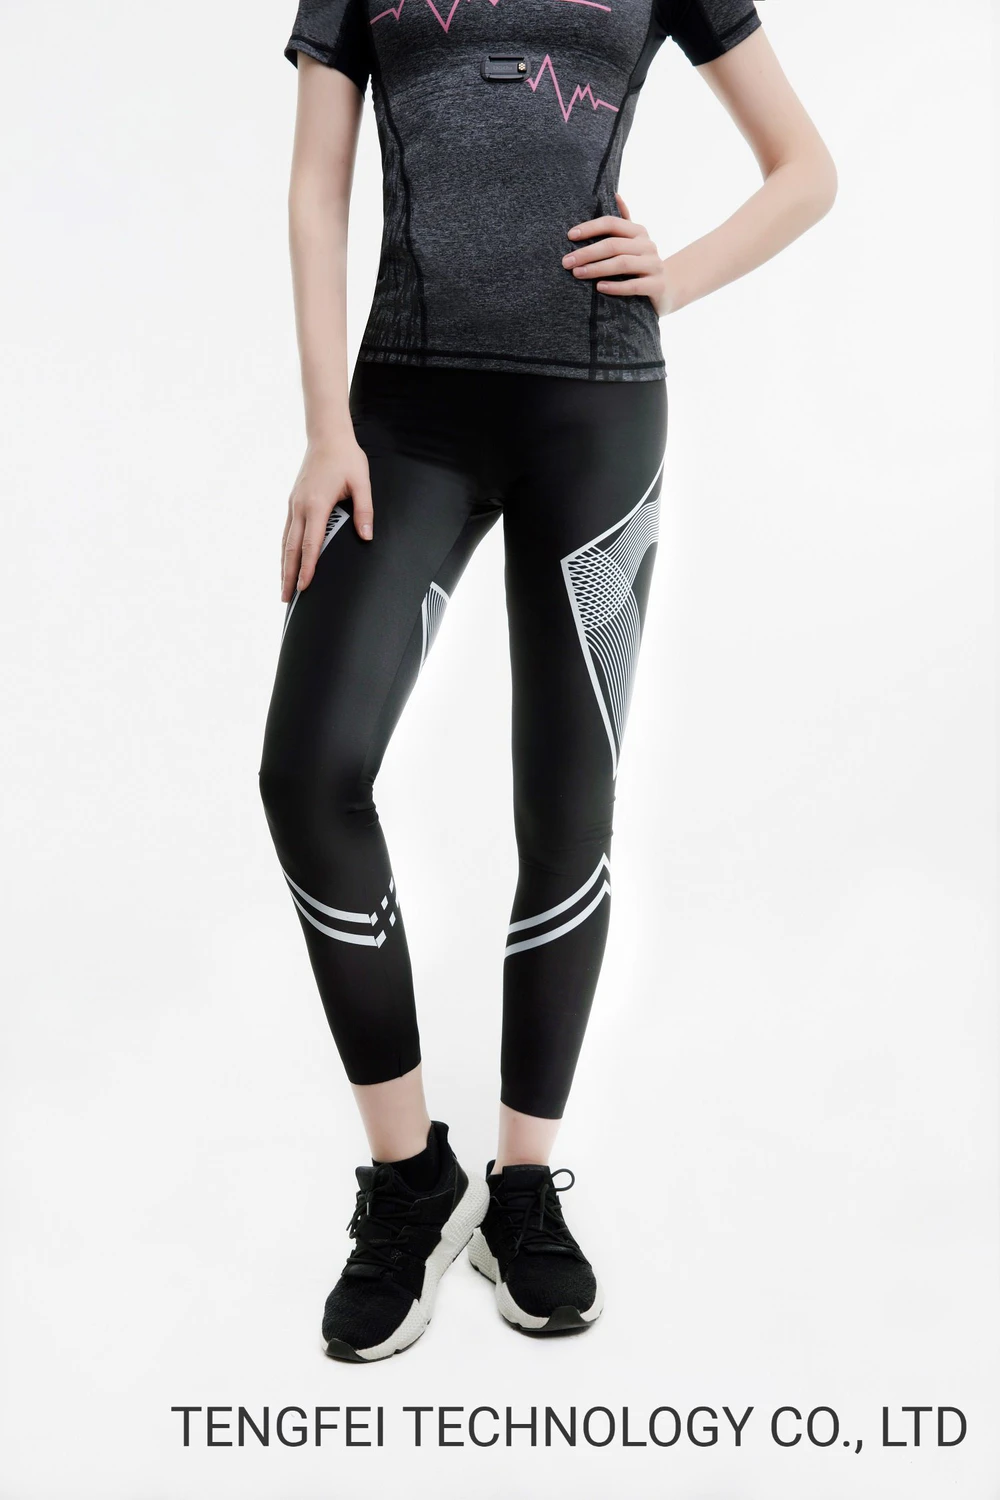 Limax Slimming Leisure and Compressive Sports Yoga Legging